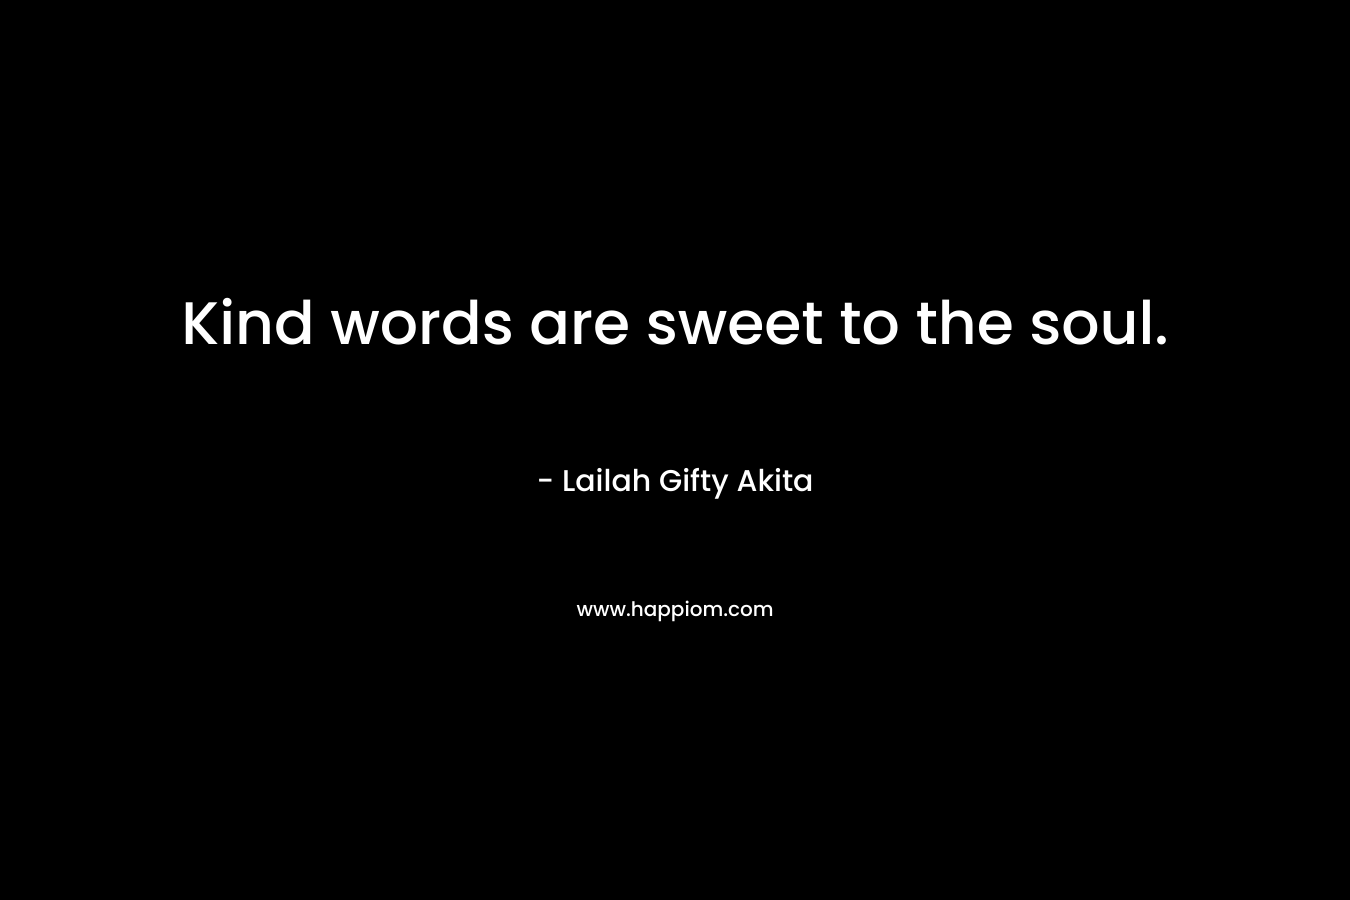 Kind words are sweet to the soul.